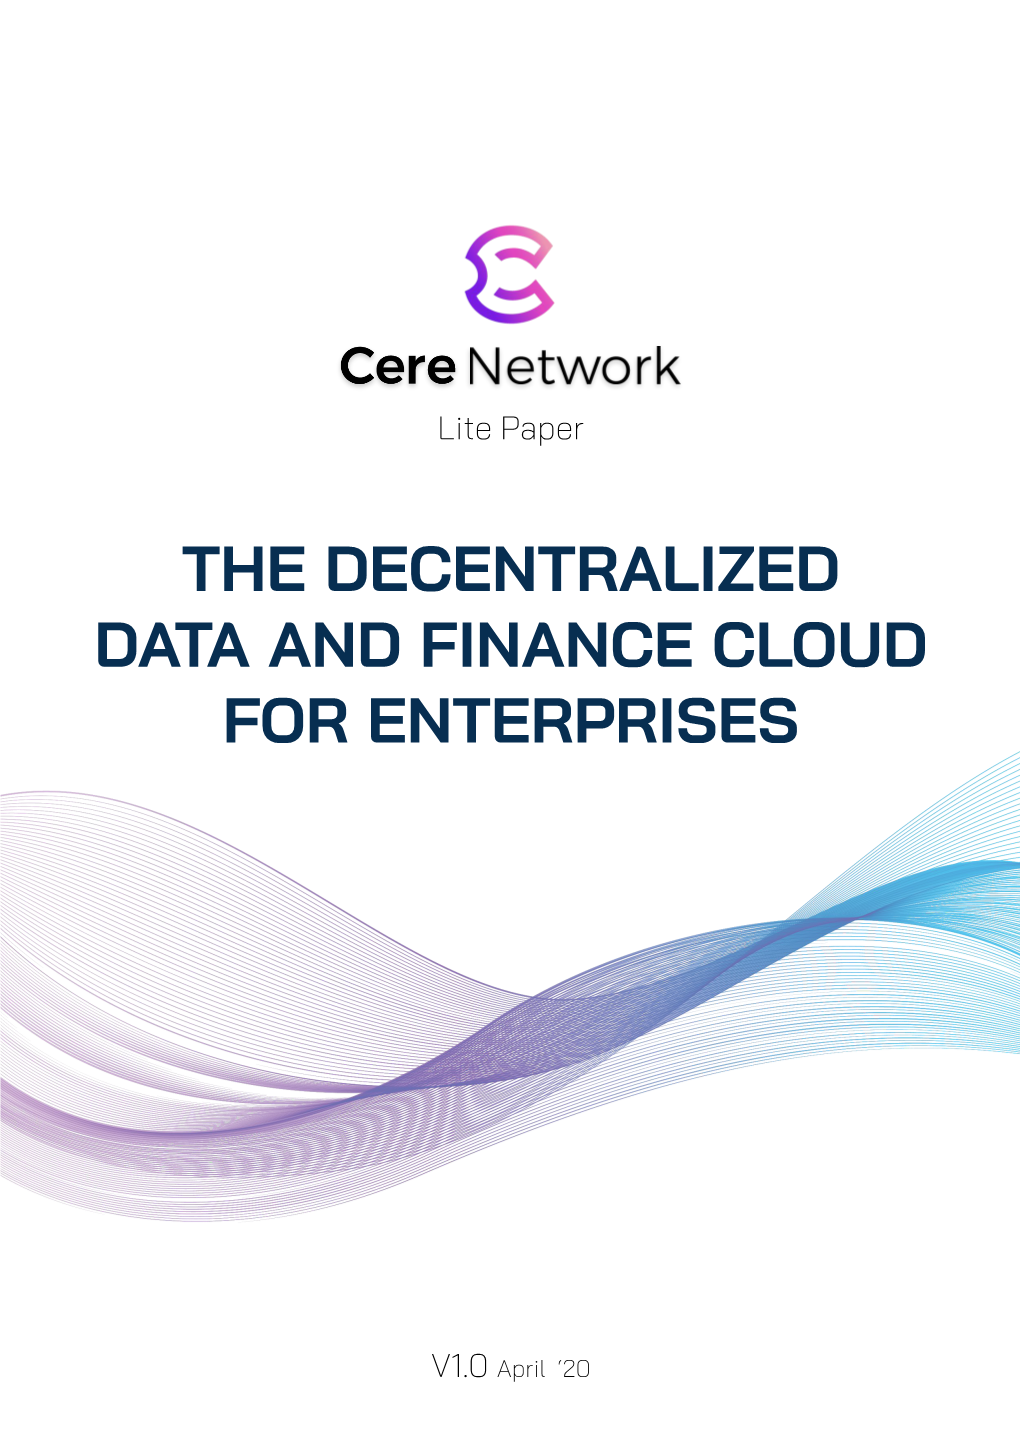 The Decentralized Data and Finance Cloud for Enterprises